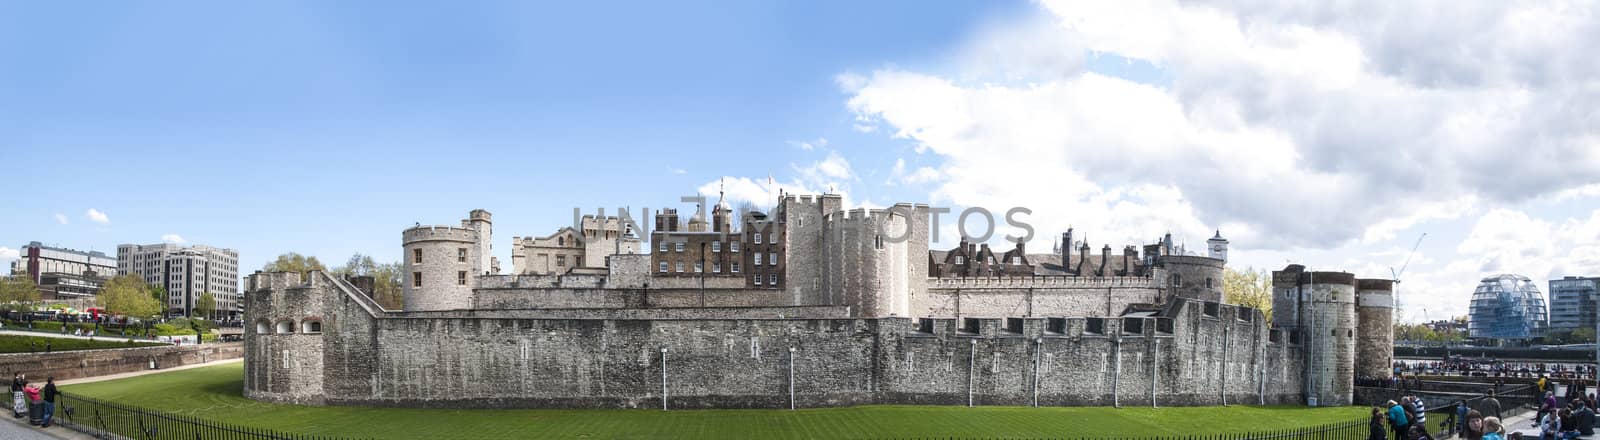 LONDON, UK - APRIL 30: Panoramic shot of the Tower of London. April 30, 2012 in London. The fortress dates back from the 1070s.